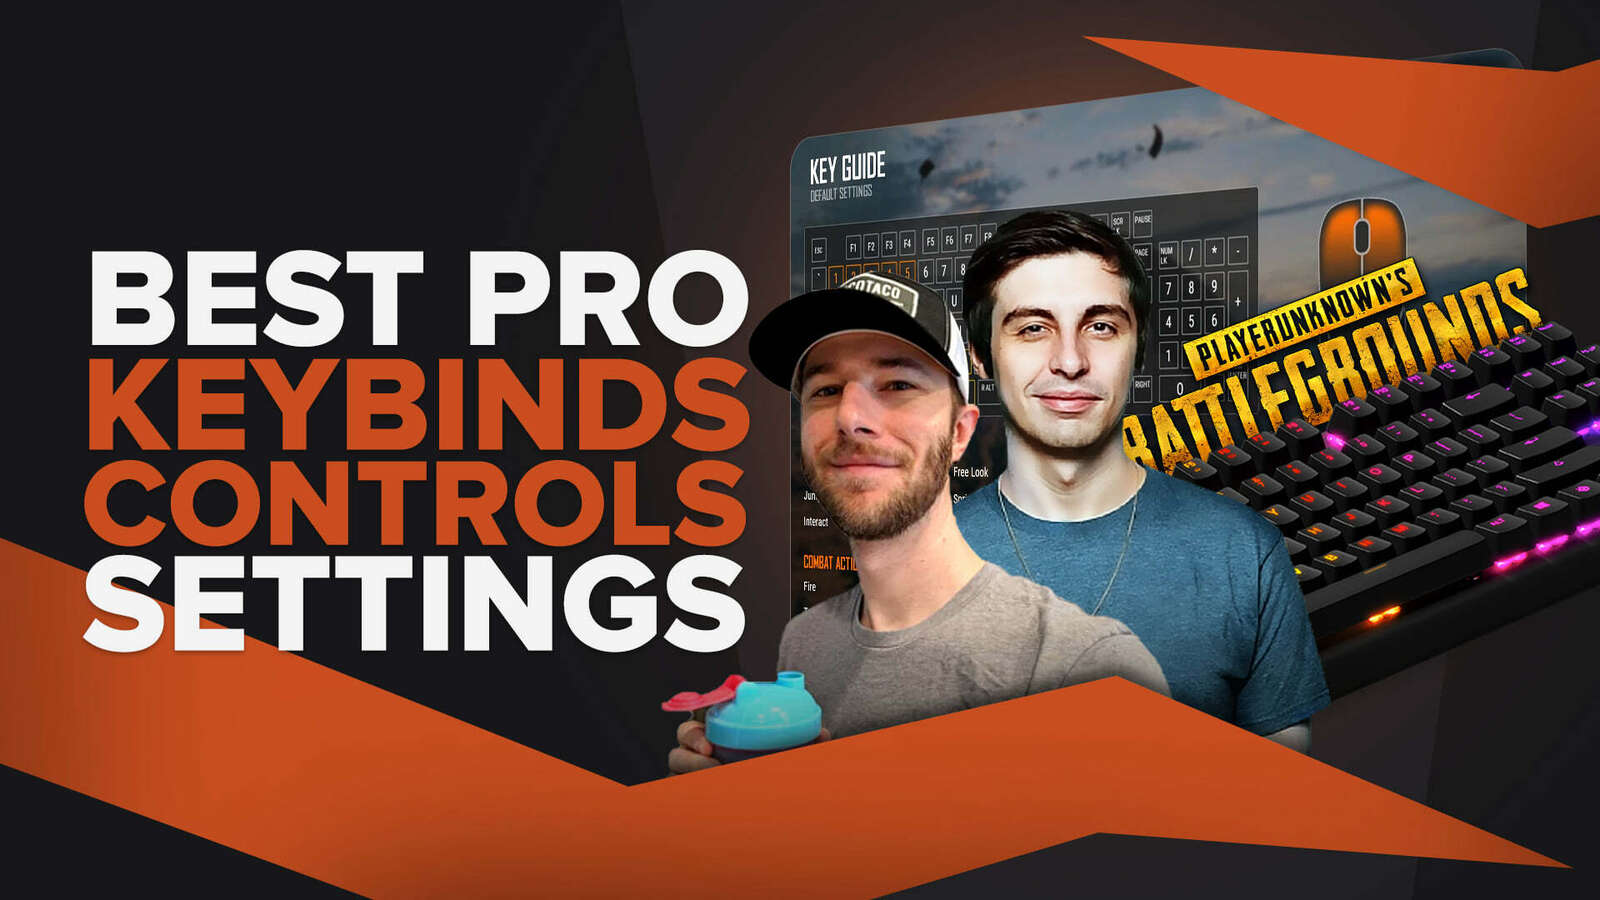 Best Control Settings and Binds in Pubg (With Examples of Pro Players)